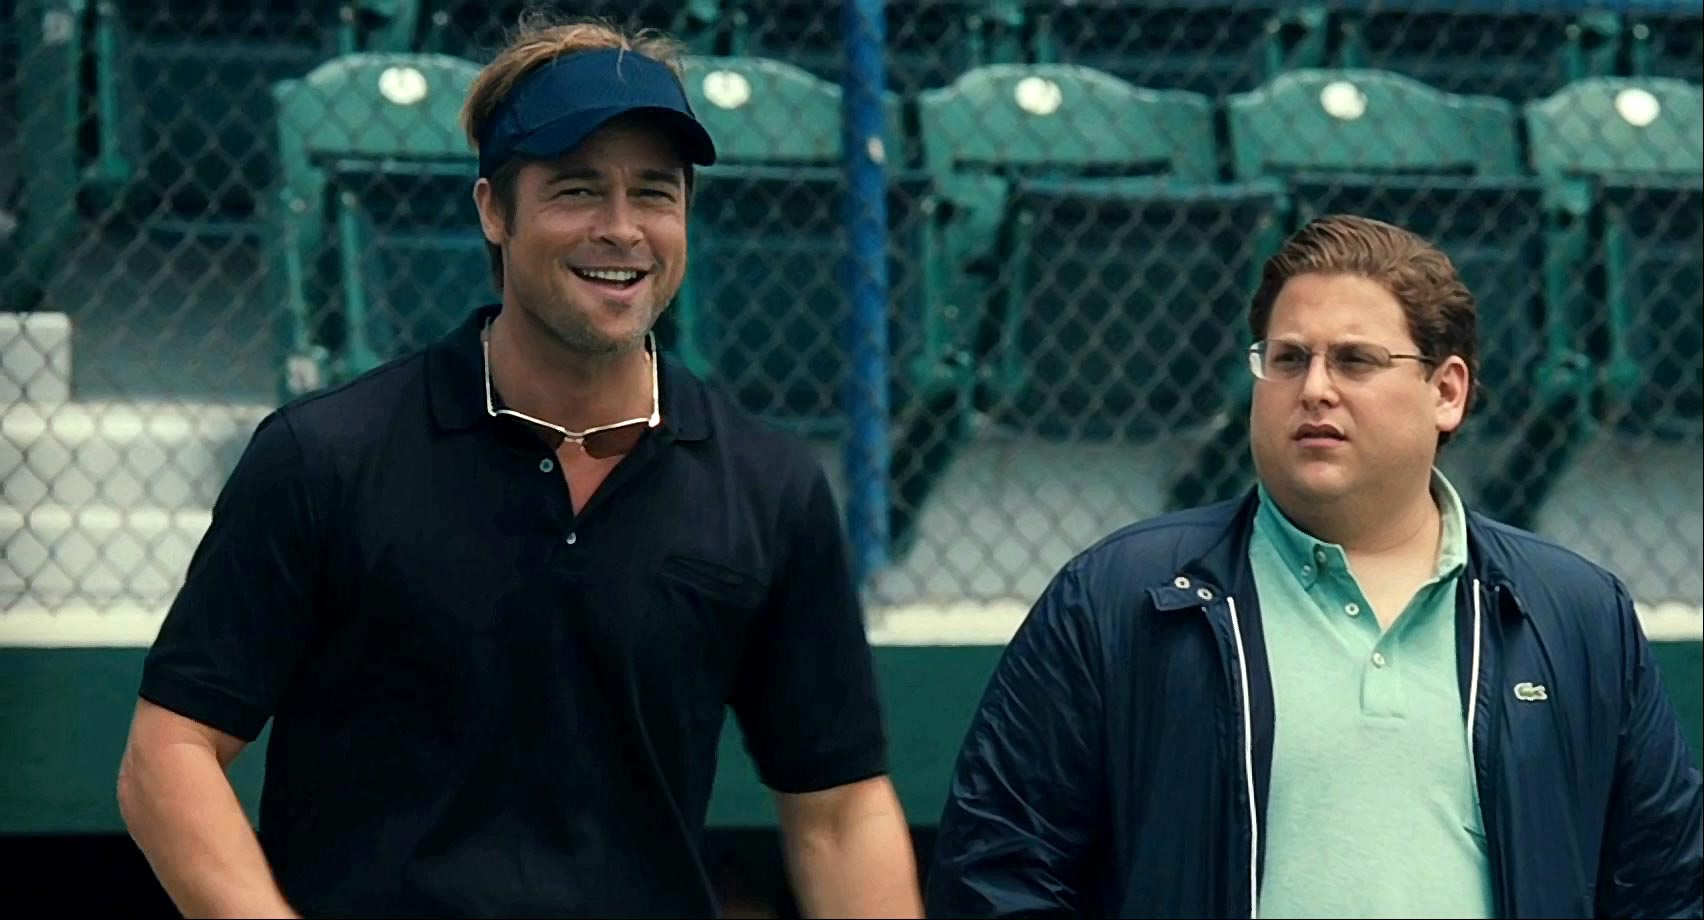 What I Learned About Business from “Moneyball” | High Quality Industrial  Coatings